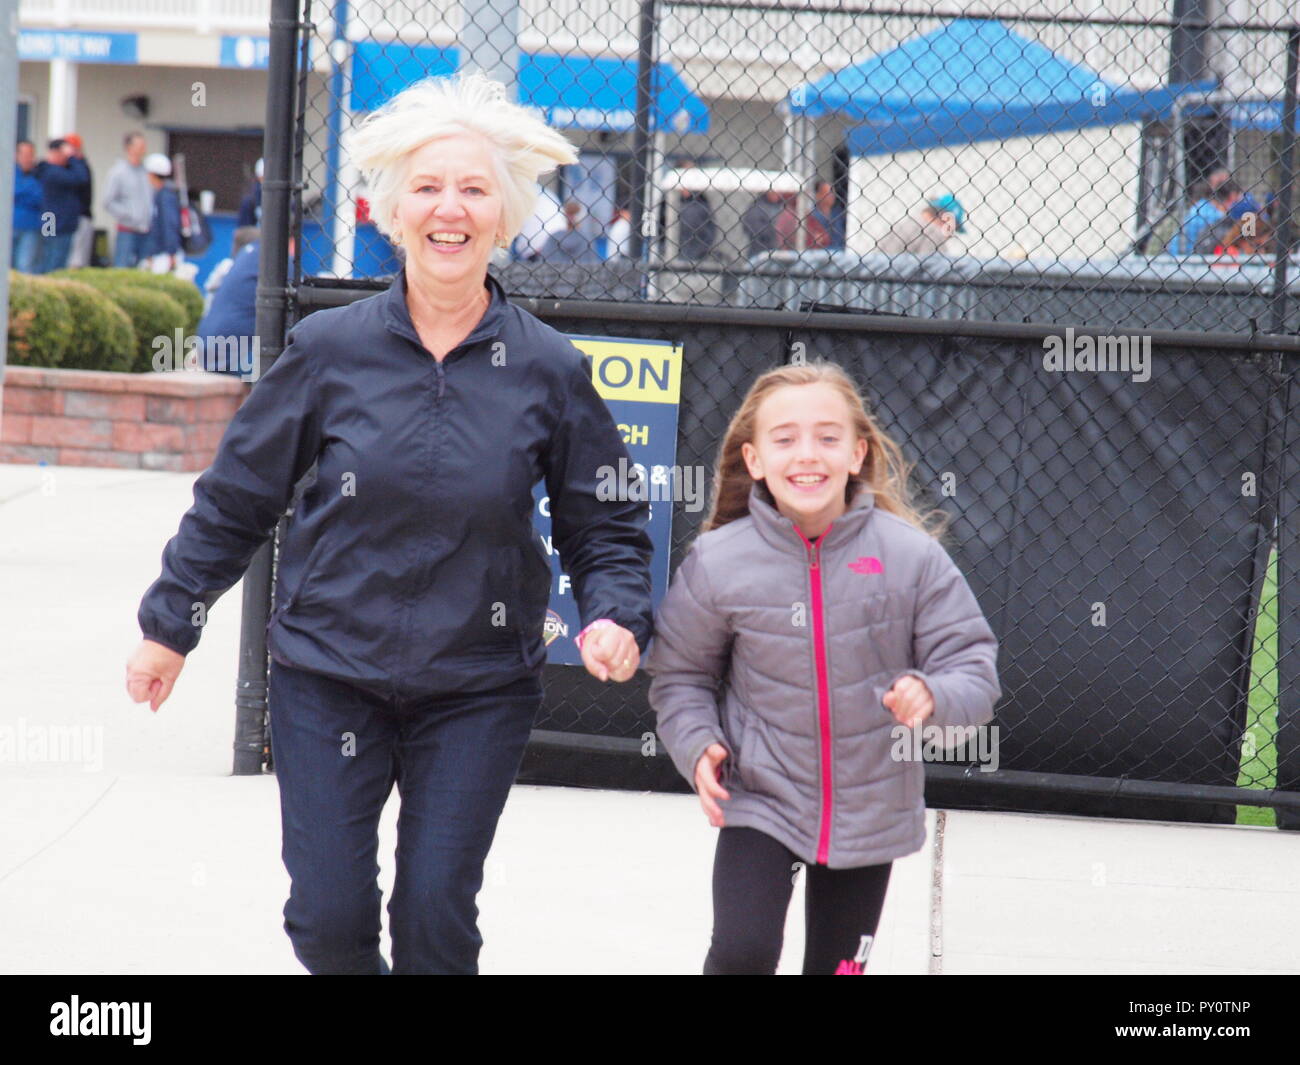 Grand daughter and grandmother running together having fun. Stock Photo